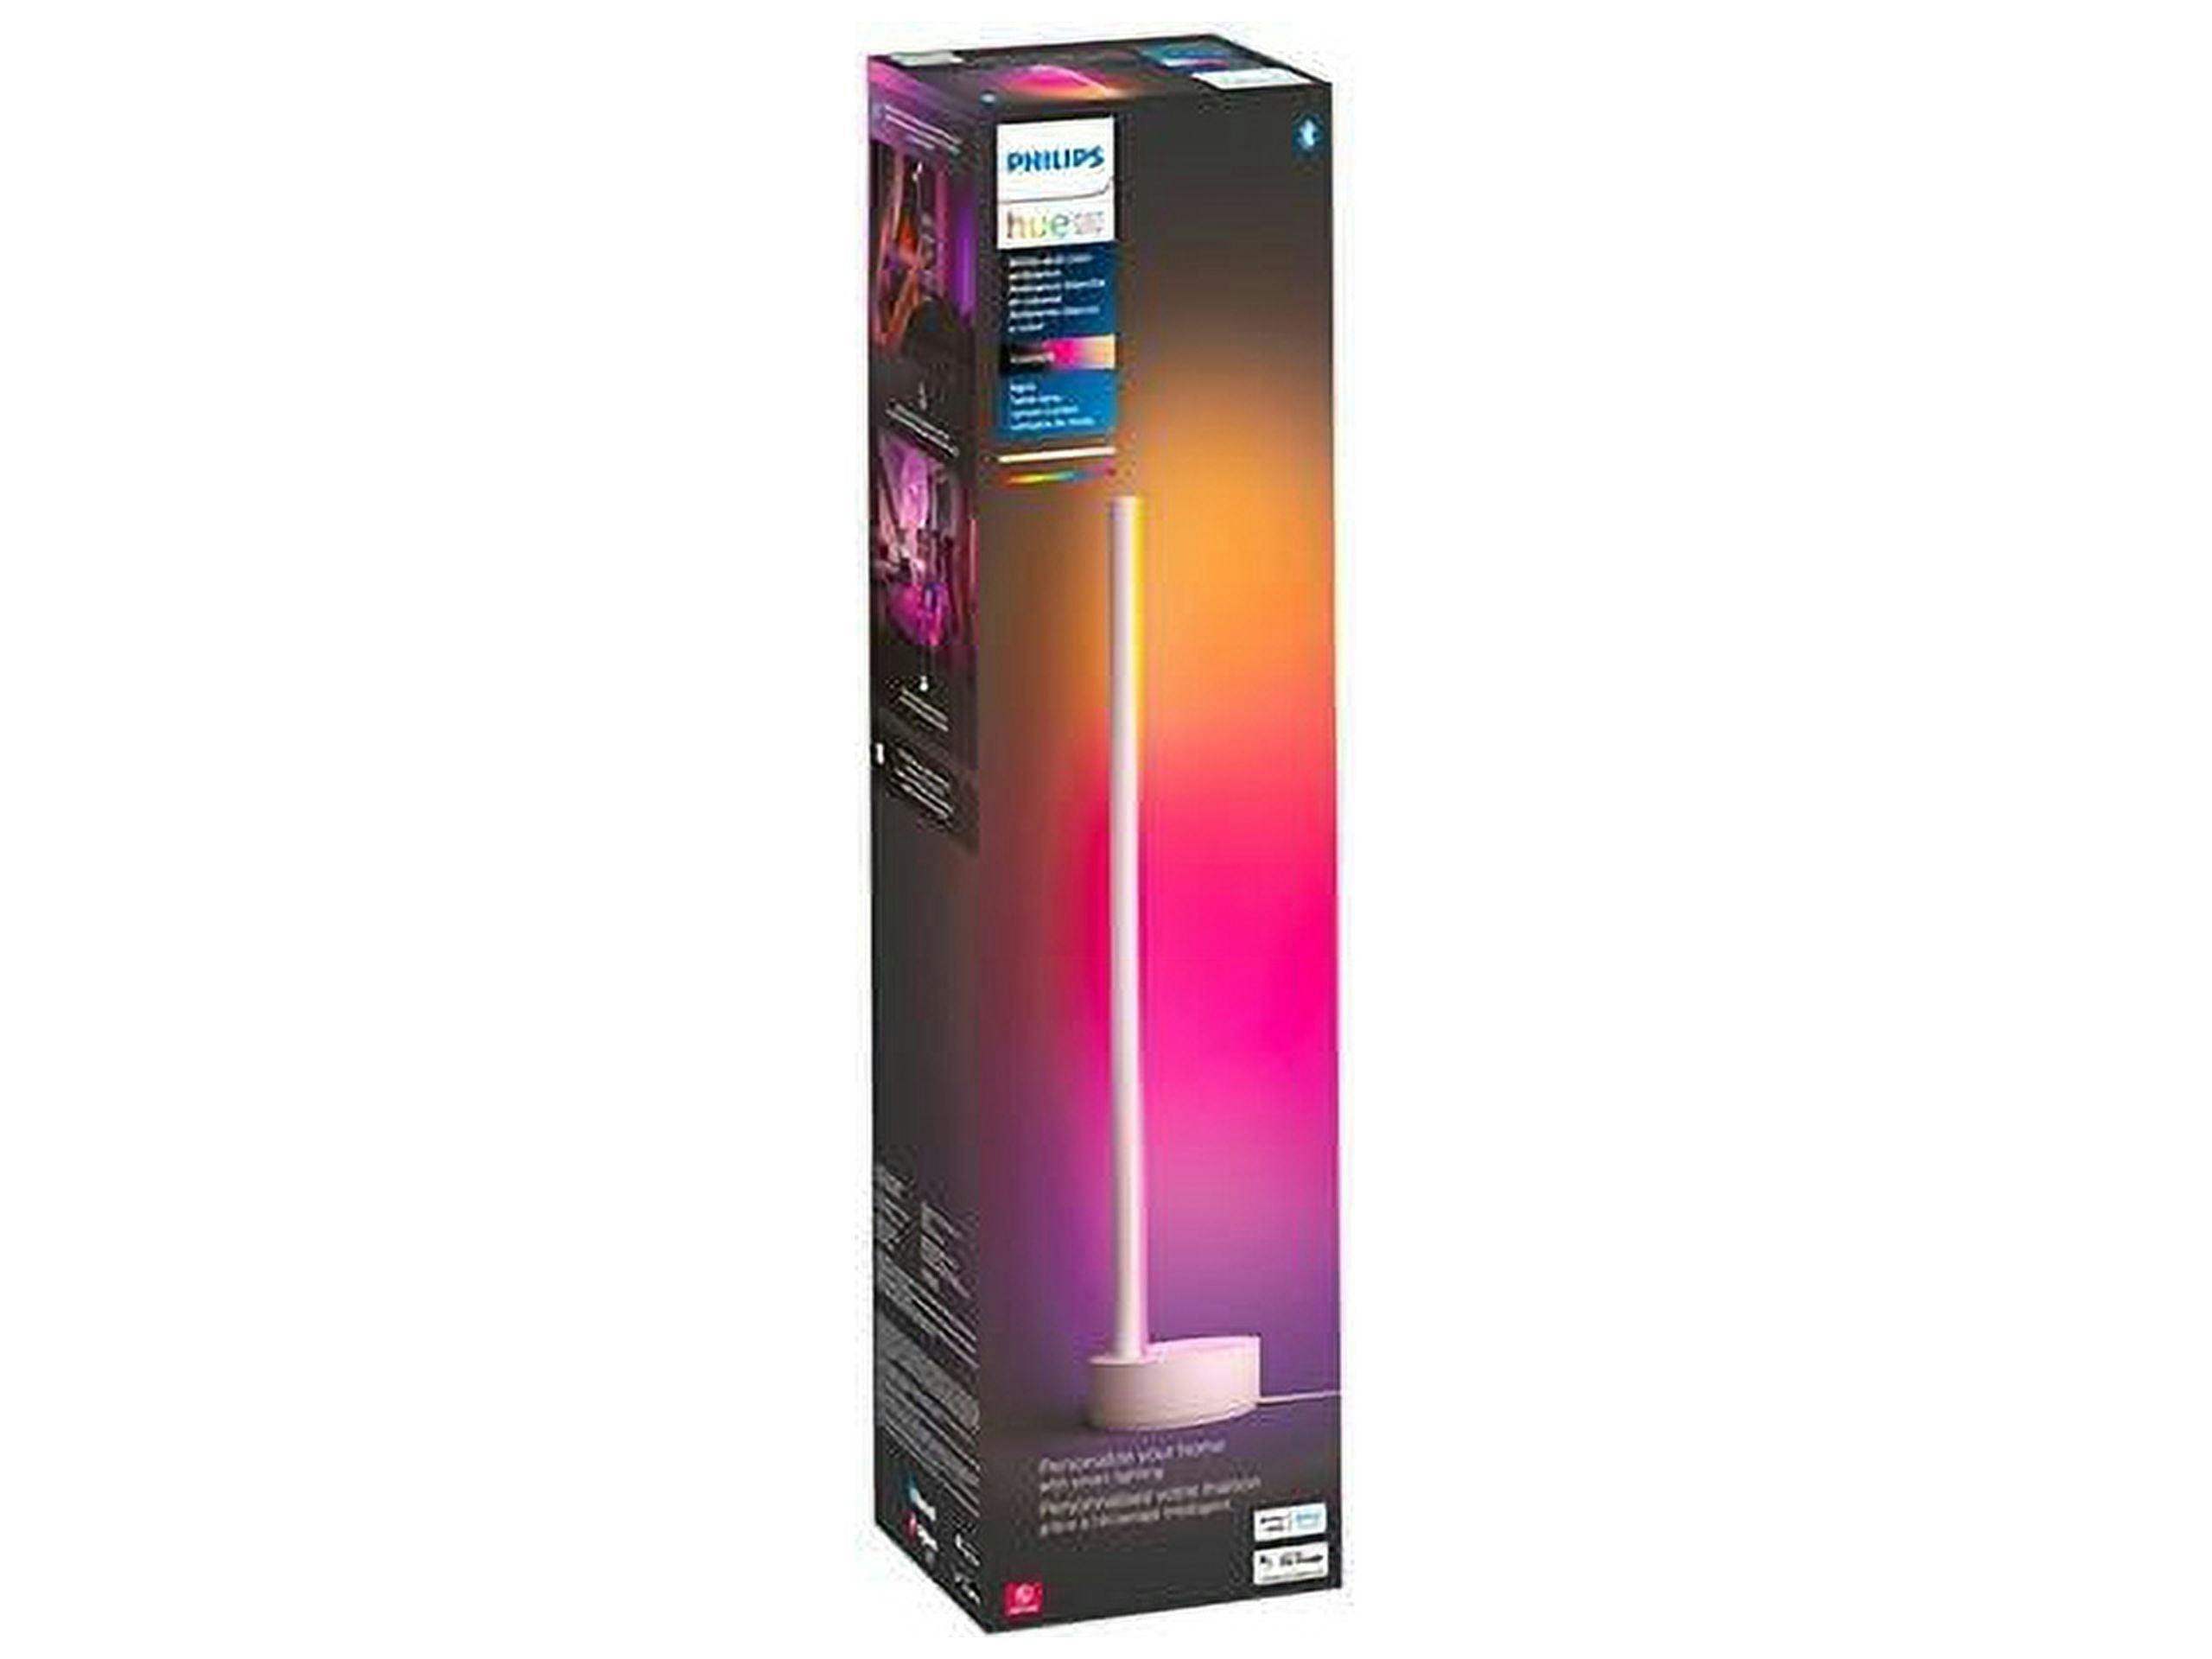 Kids' Smart Desk Lamp with Voice Control and Color Gradient